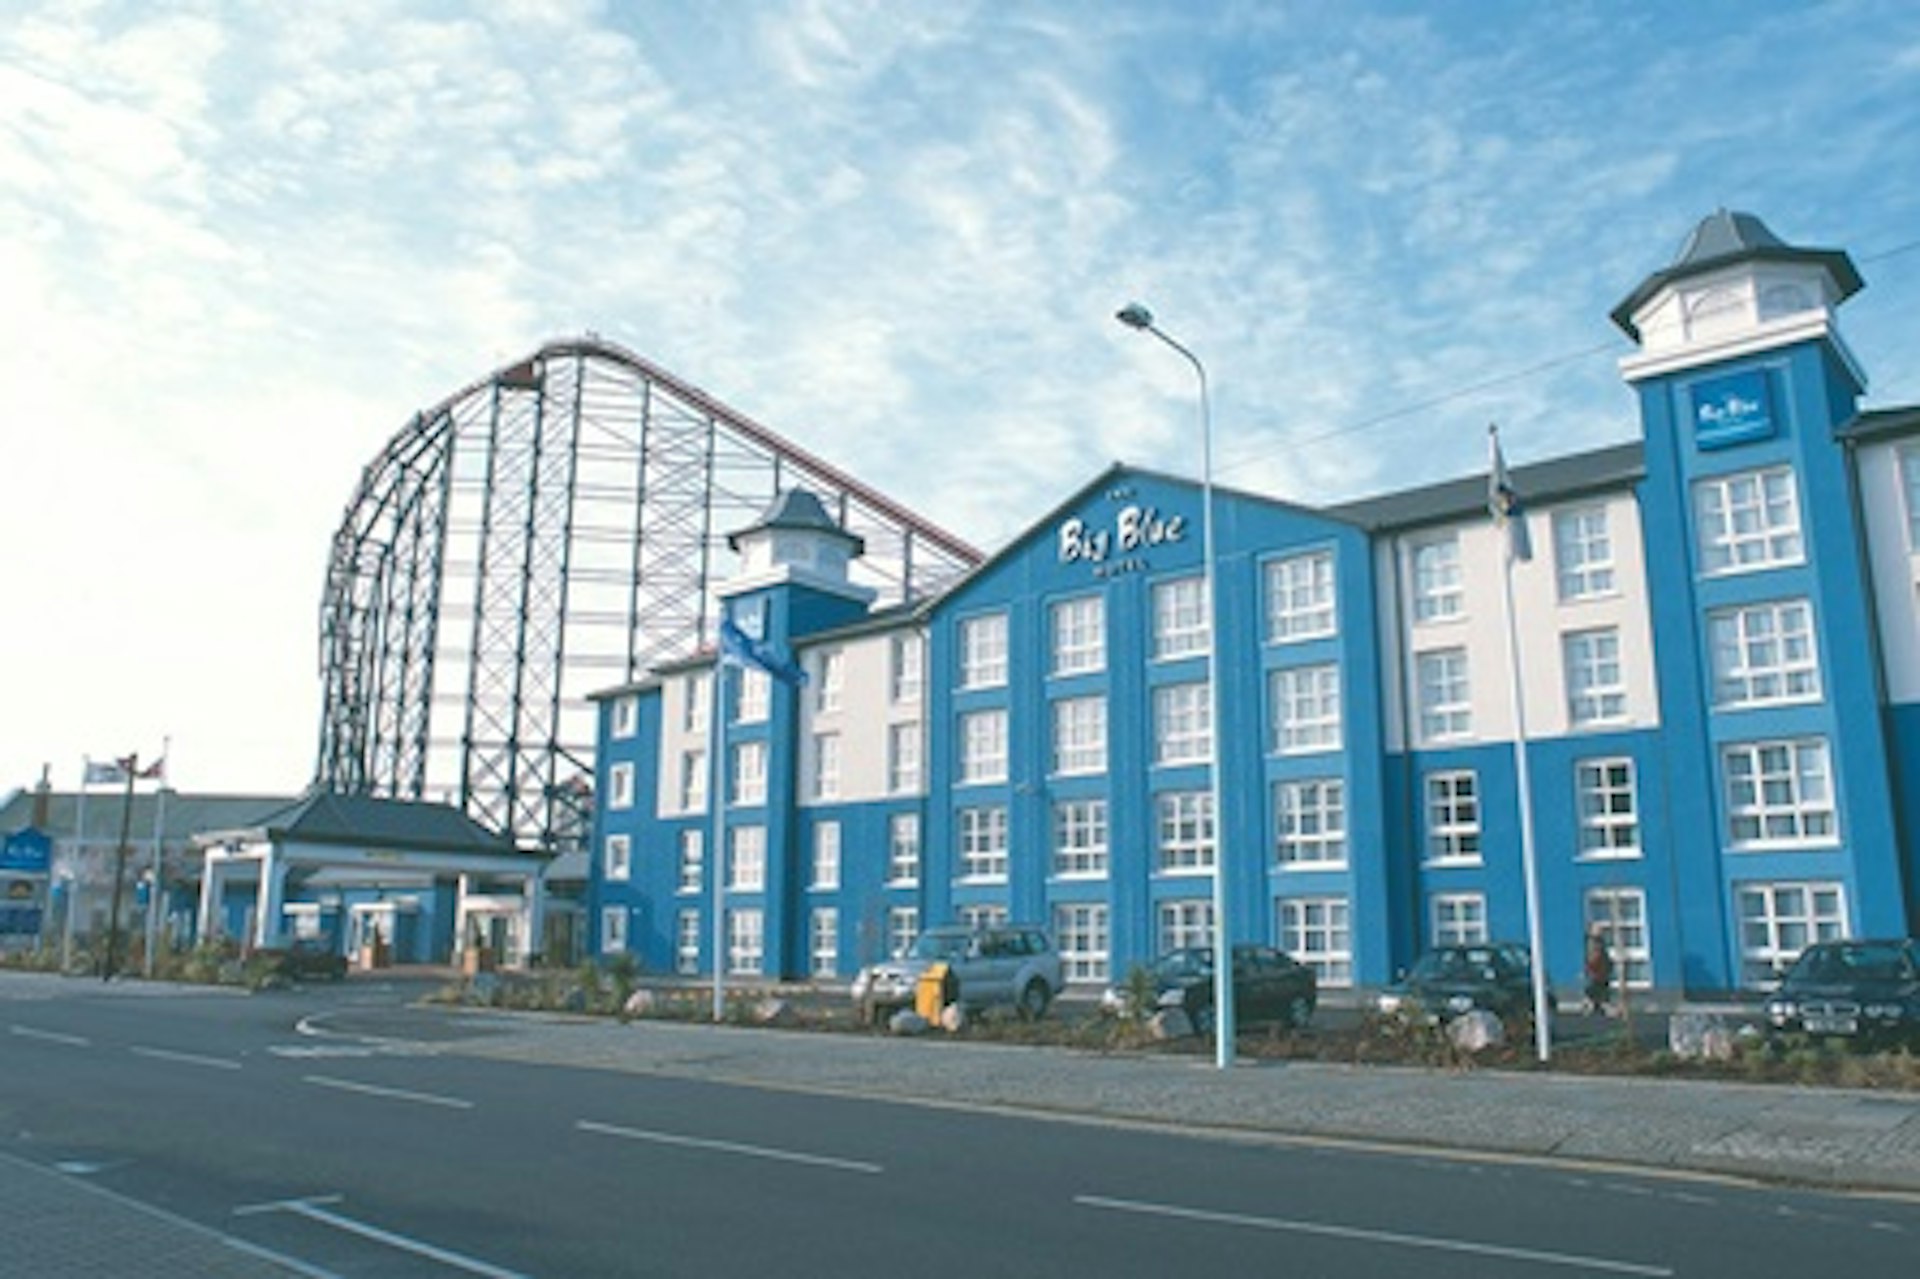 Two Night Coastal Escape for Two at The Big Blue Hotel, Blackpool 2